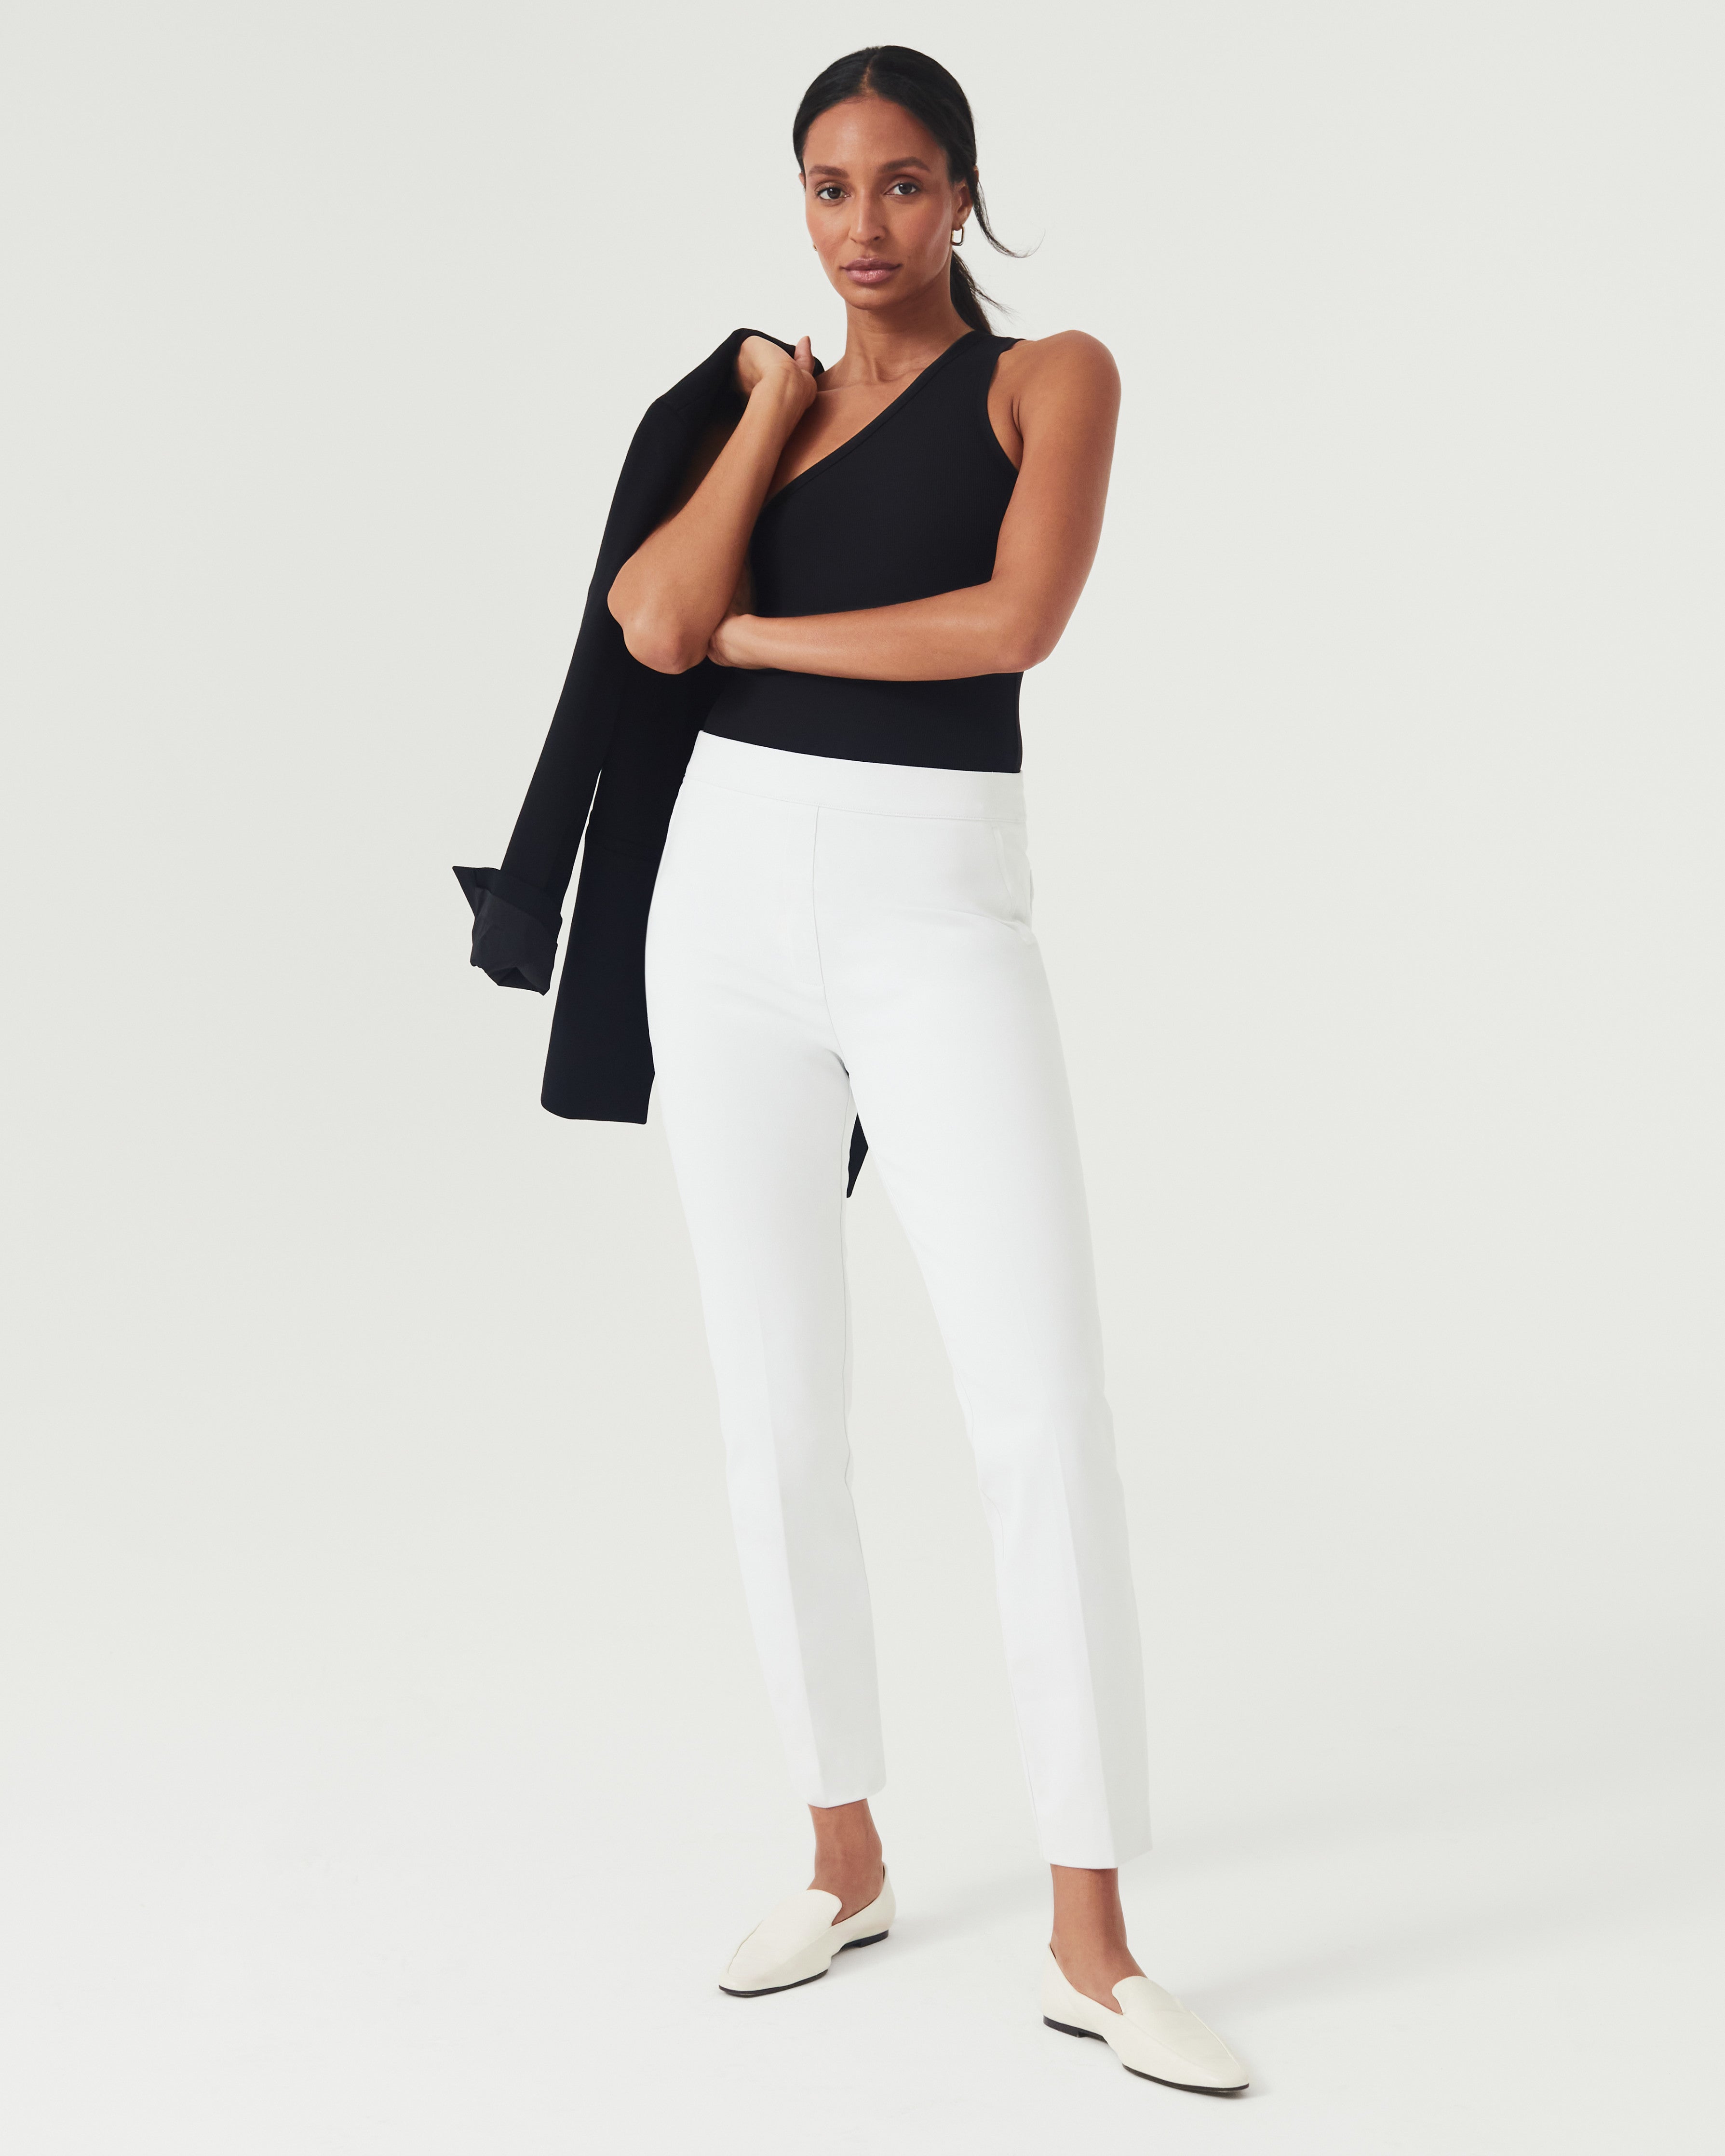 Spanx has created one work pant collection to rule them all